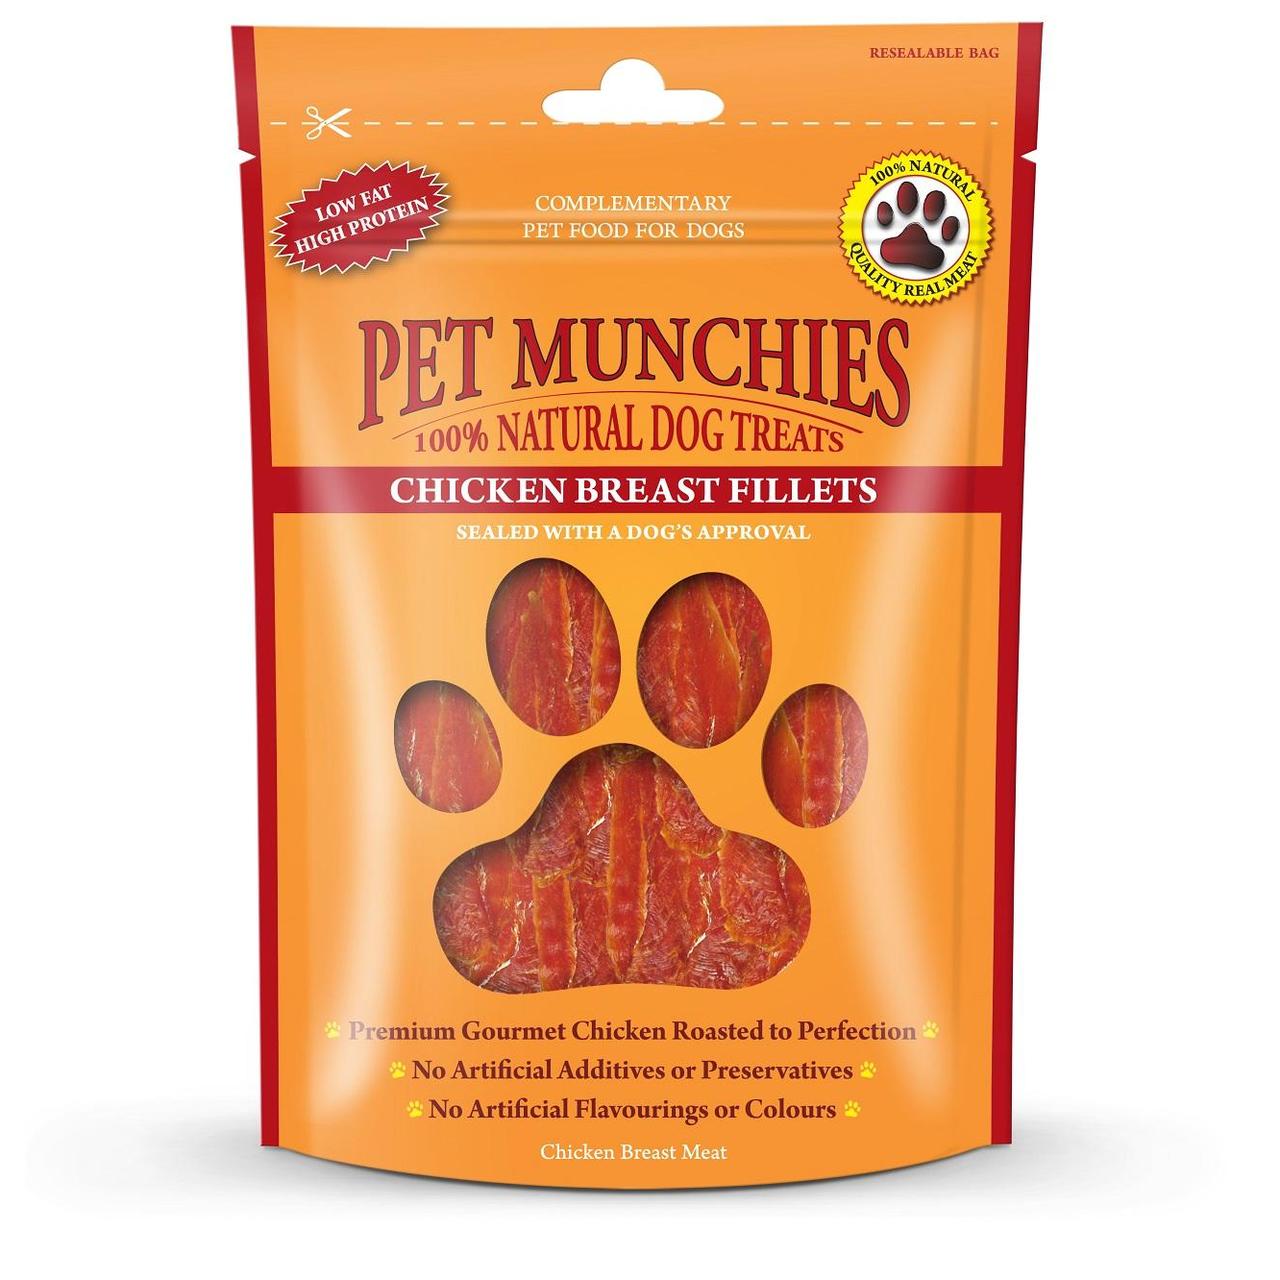 An image of Pet Munchies 100% Natural Chicken Breast Fillets Dog Treats